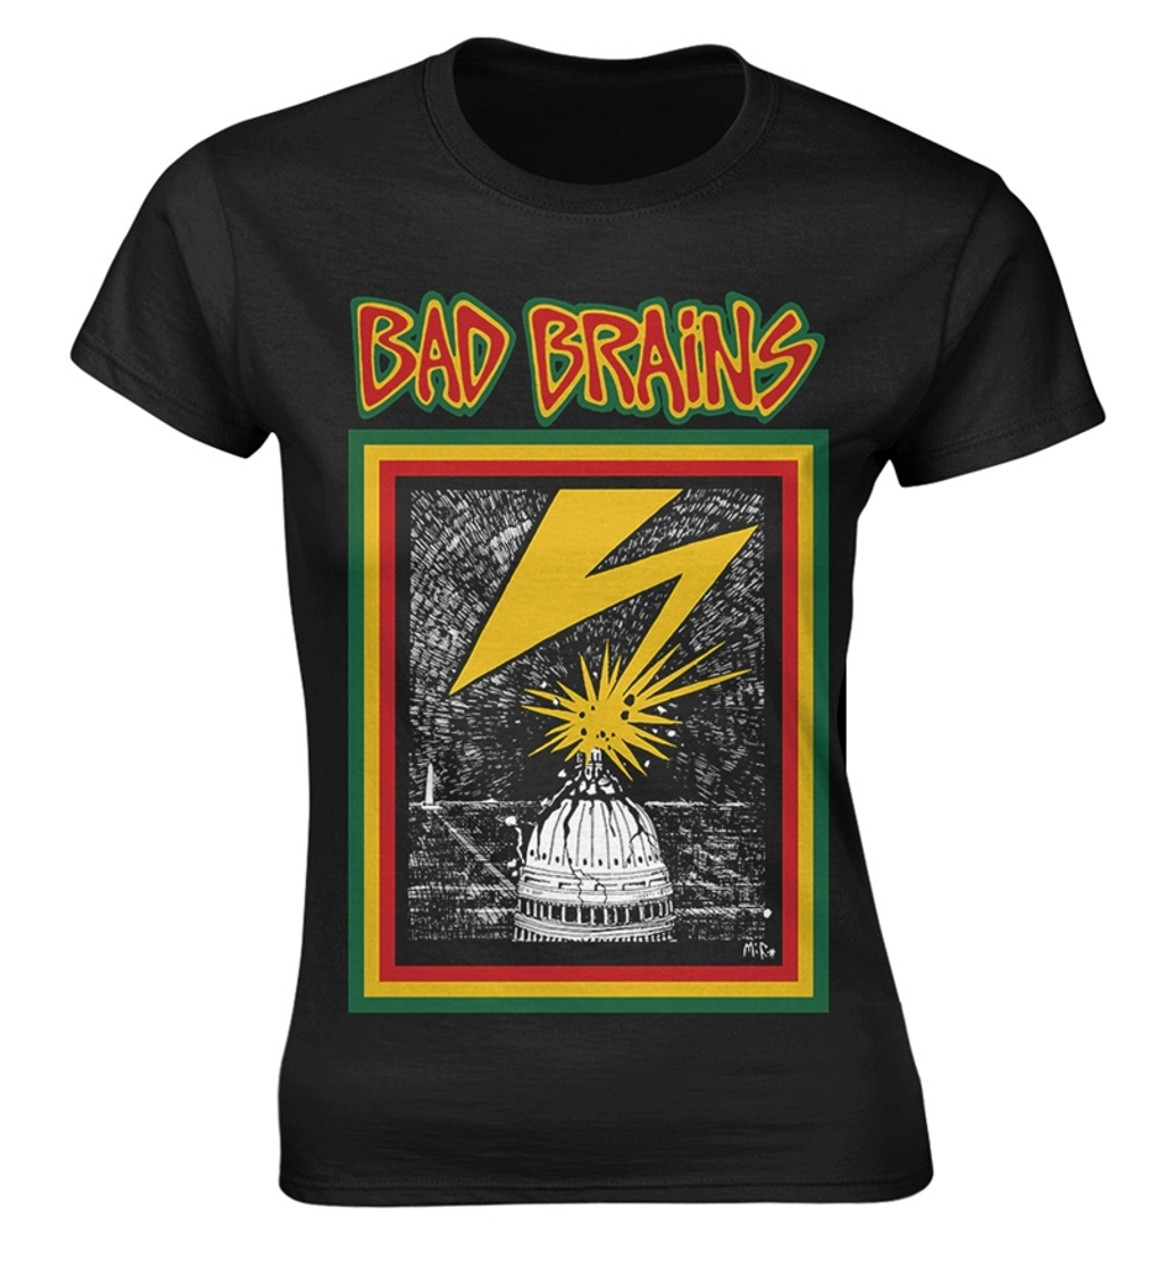 Bad Brains 'Bad Brains' Womens Fitted T-Shirt